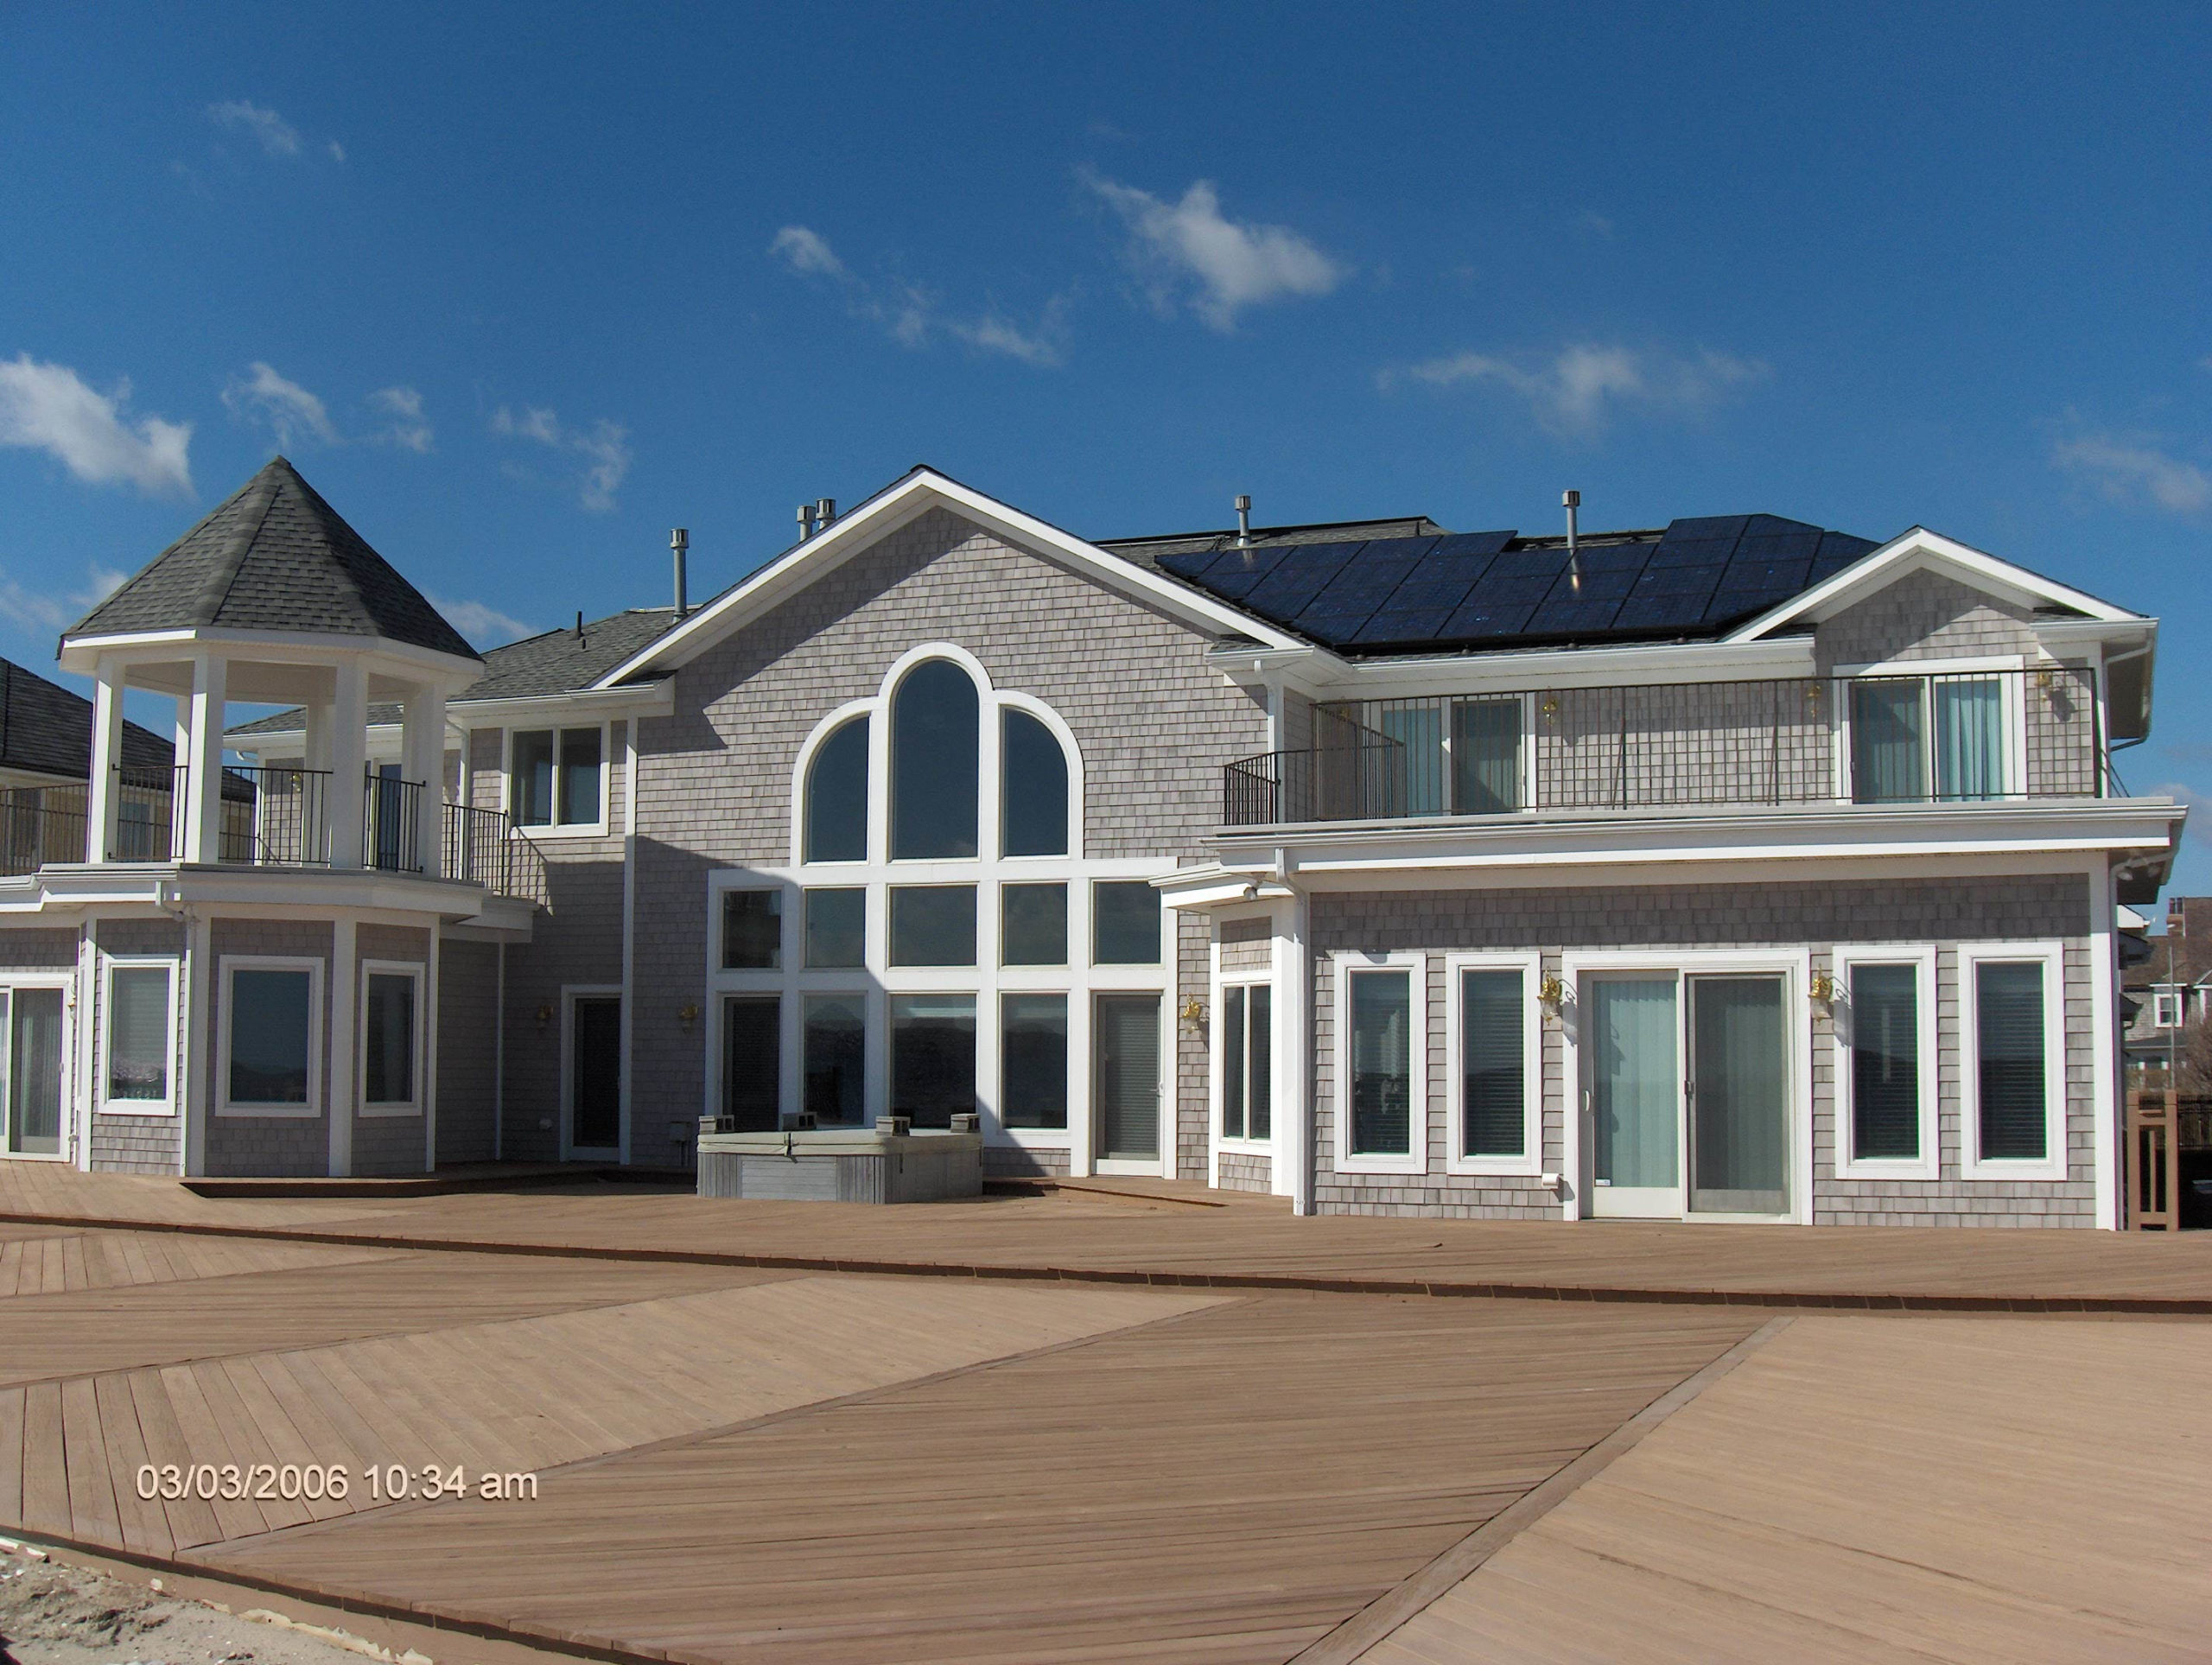 Home on boardwalk with solar panels